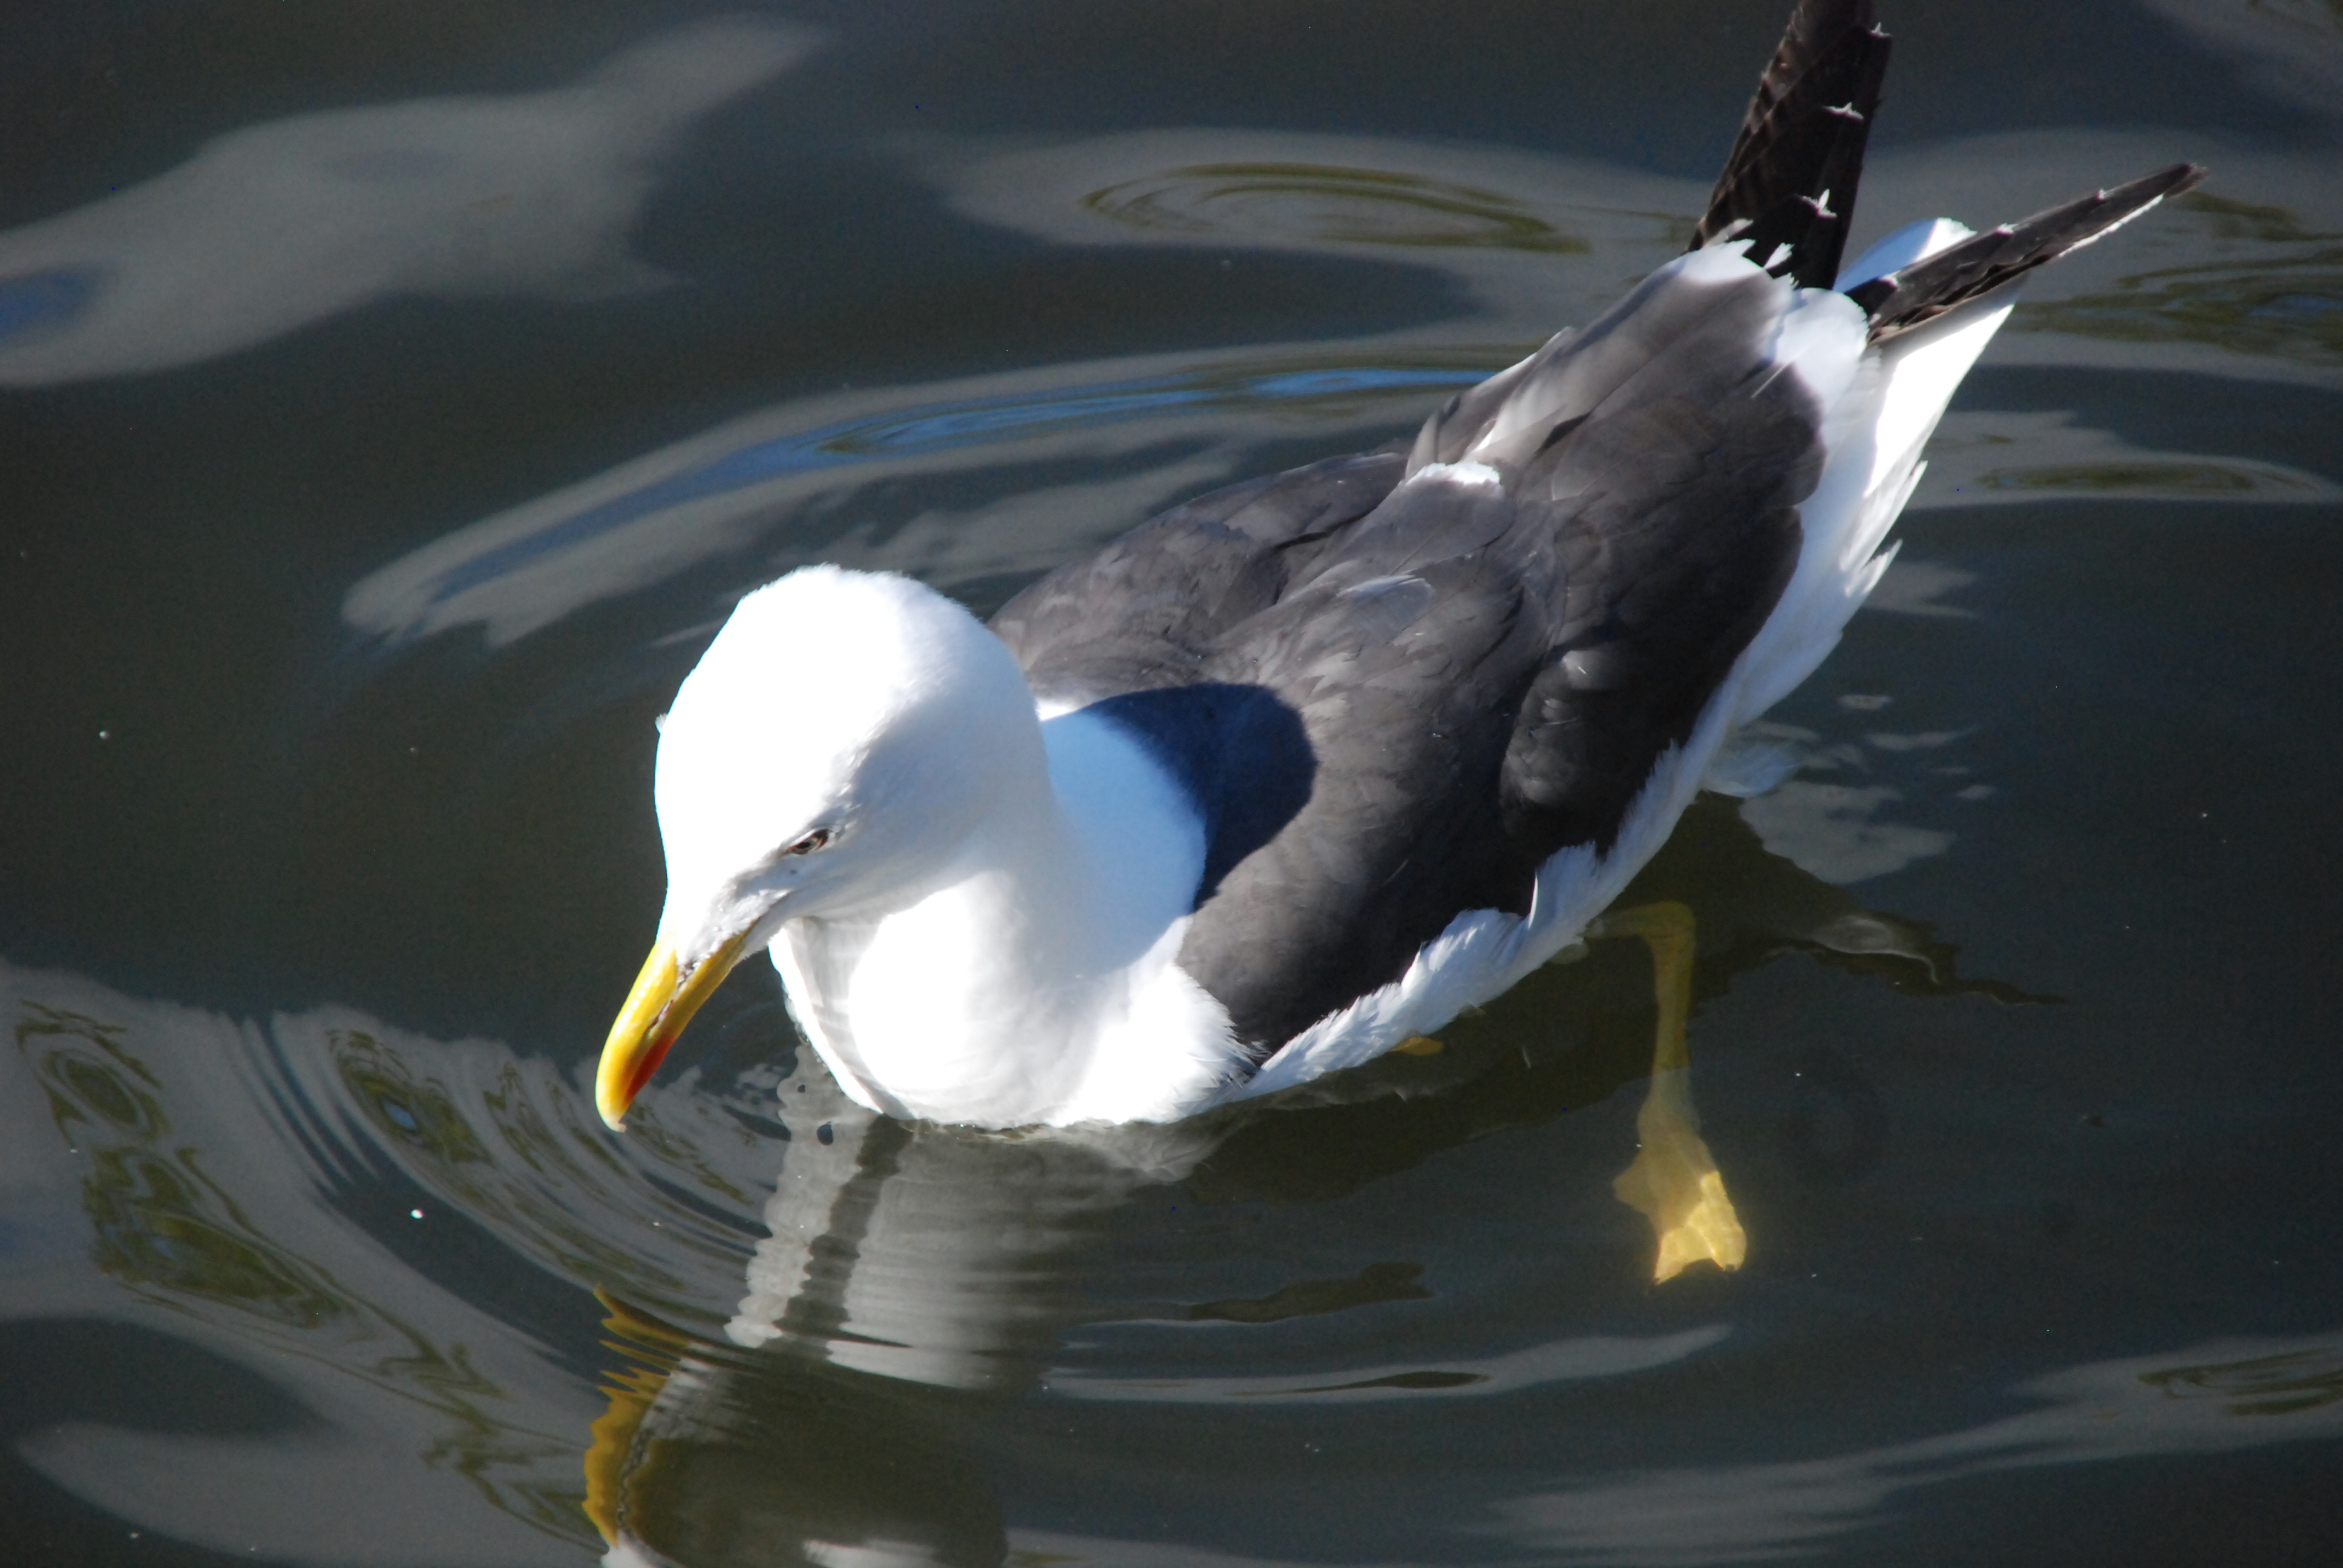 Click picture to see more Lesser Black-Backed Gulls.